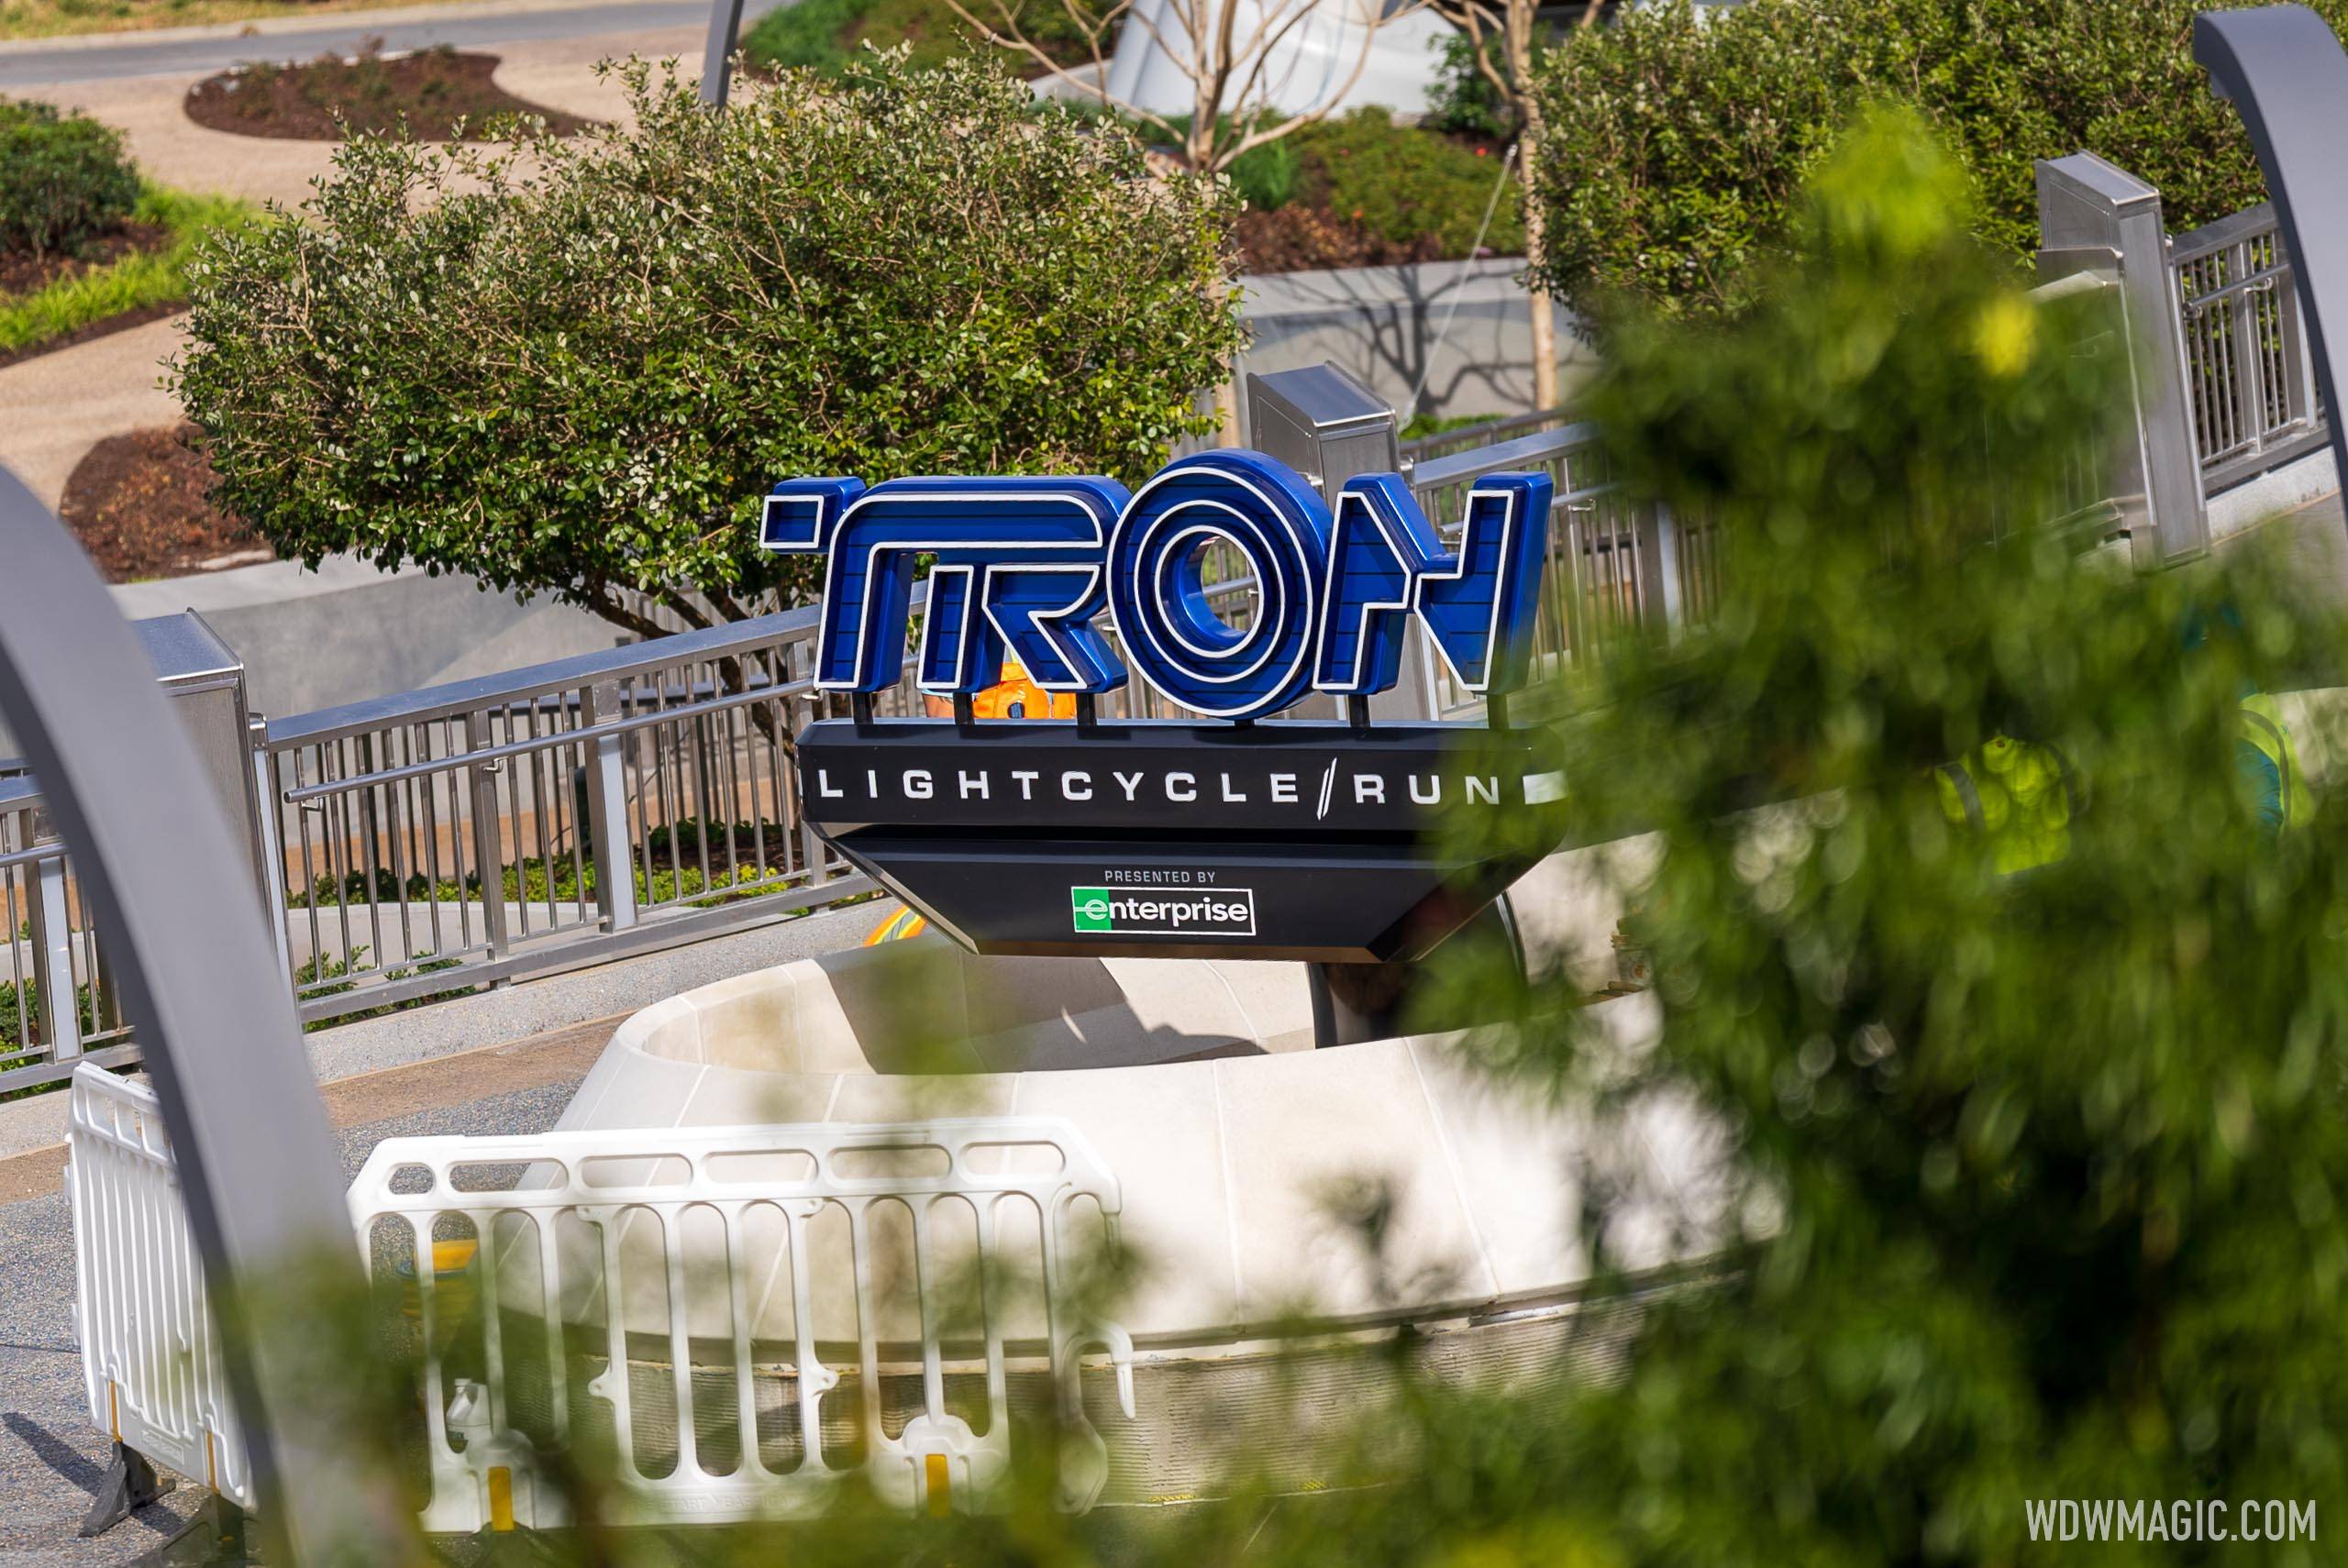 More views of the TRON Lightcycle Run marquee sign